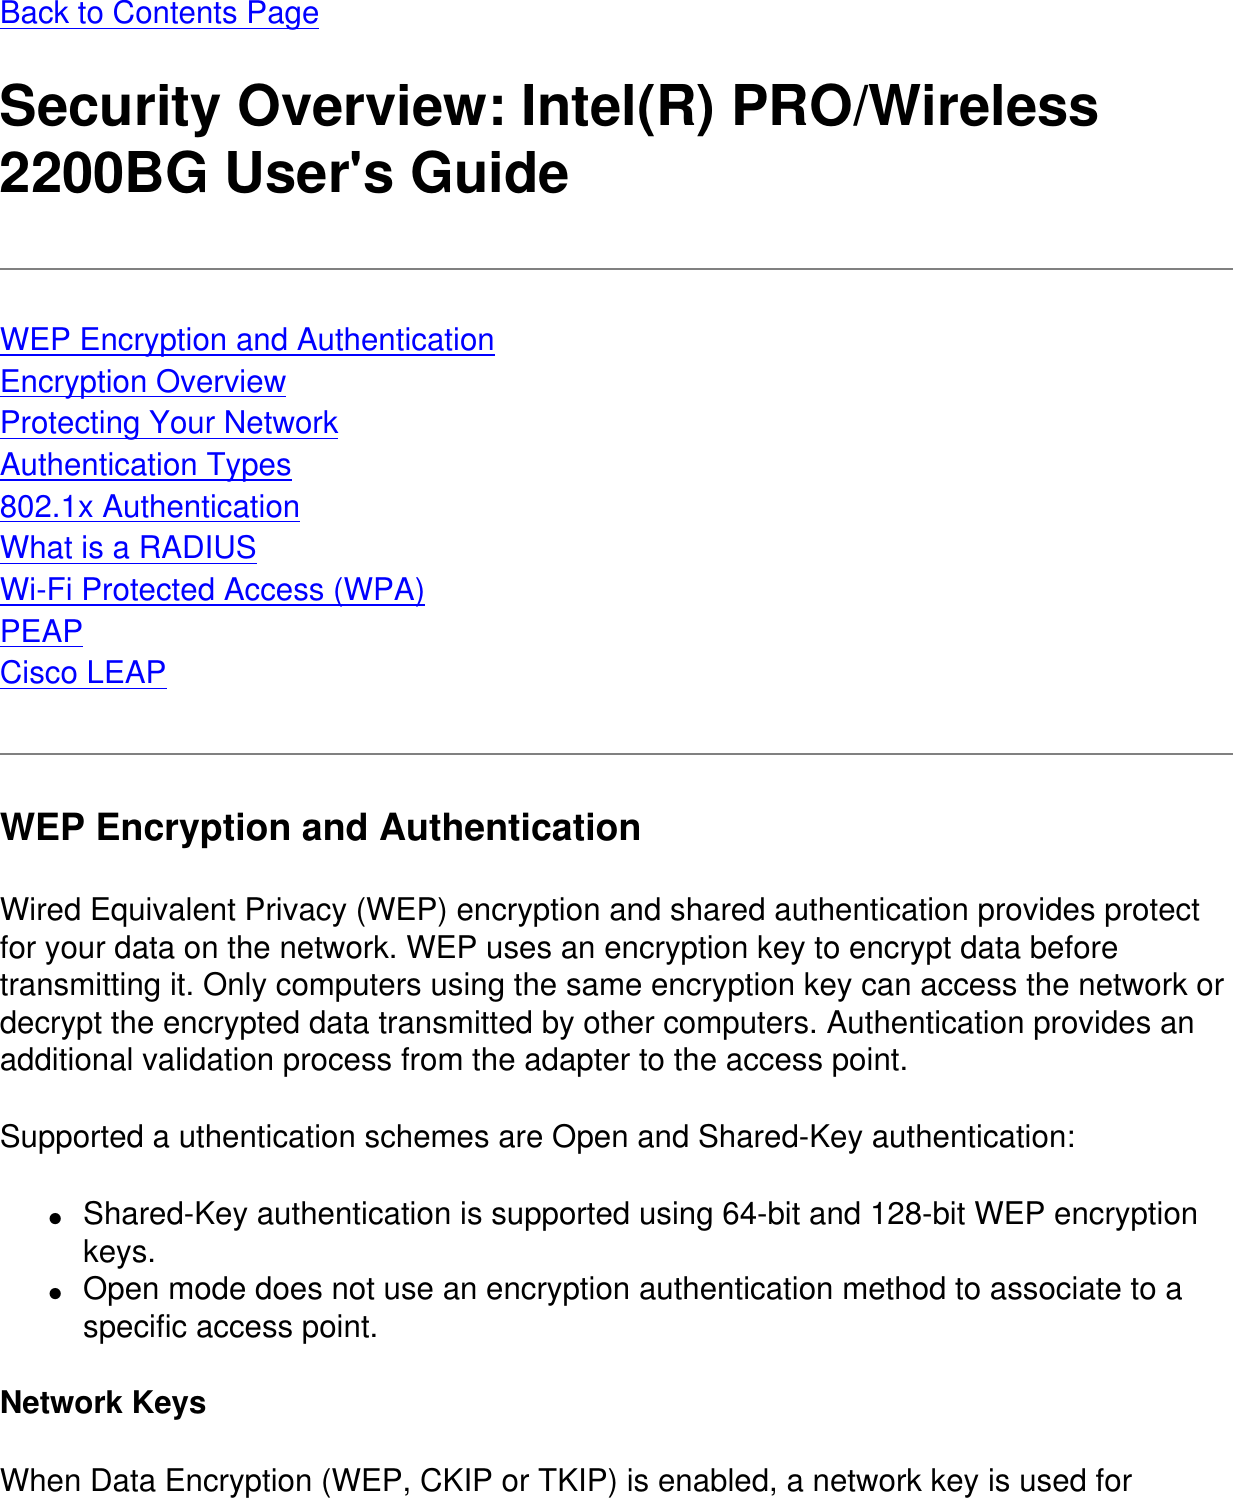 Back to Contents PageSecurity Overview: Intel(R) PRO/Wireless 2200BG User&apos;s GuideWEP Encryption and AuthenticationEncryption OverviewProtecting Your NetworkAuthentication Types802.1x AuthenticationWhat is a RADIUSWi-Fi Protected Access (WPA)PEAPCisco LEAPWEP Encryption and AuthenticationWired Equivalent Privacy (WEP) encryption and shared authentication provides protect for your data on the network. WEP uses an encryption key to encrypt data before transmitting it. Only computers using the same encryption key can access the network or decrypt the encrypted data transmitted by other computers. Authentication provides an additional validation process from the adapter to the access point.Supported a uthentication schemes are Open and Shared-Key authentication:●     Shared-Key authentication is supported using 64-bit and 128-bit WEP encryption keys.●     Open mode does not use an encryption authentication method to associate to a specific access point.Network KeysWhen Data Encryption (WEP, CKIP or TKIP) is enabled, a network key is used for 